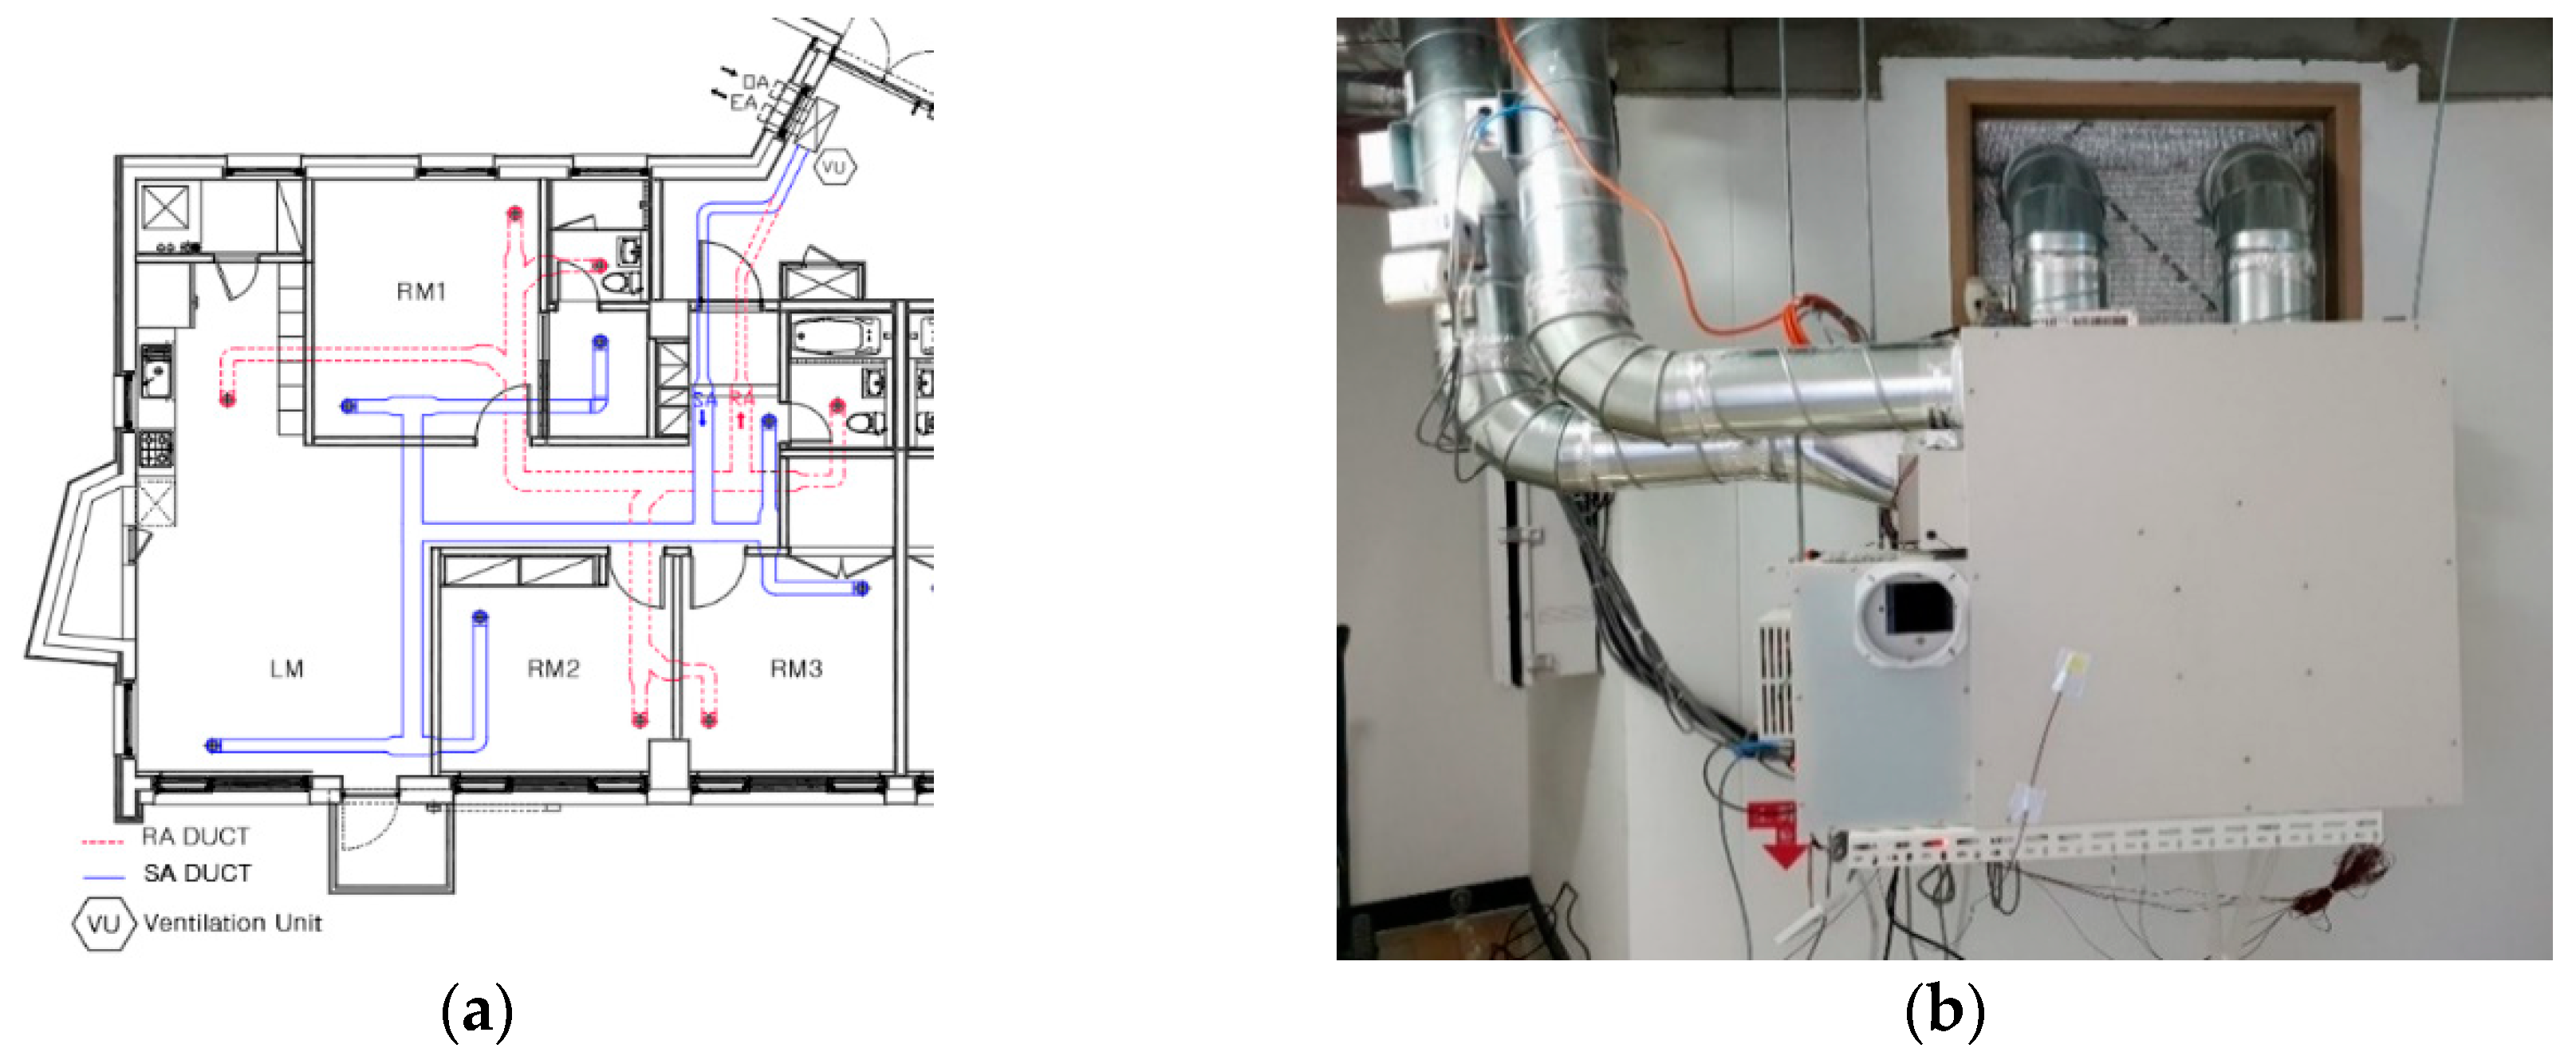 Energies | Free Full-Text | Effect of Bypass Control and Room Control Modes  on Fan Energy Savings in a Heat Recovery Ventilation System